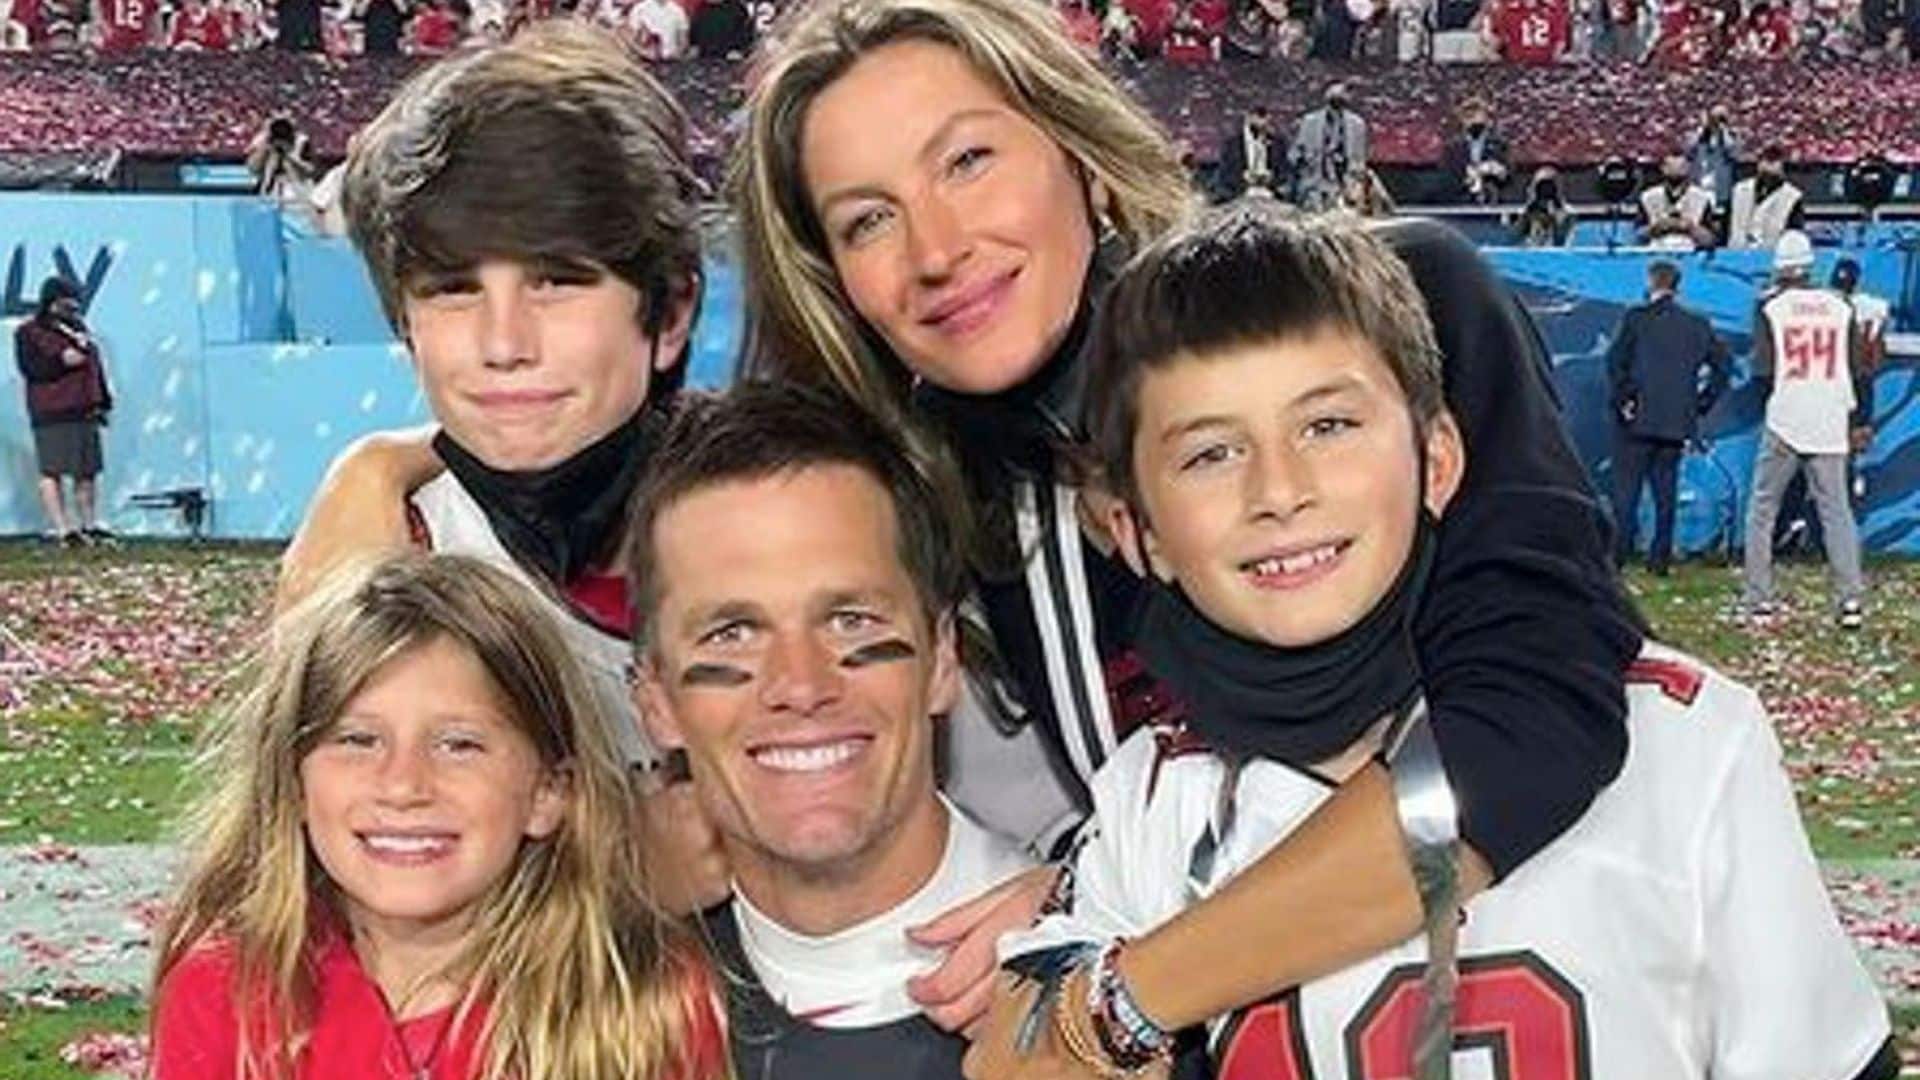 Gisele Bündchen shares sweet photos of Tom Brady and kids from the Super Bowl